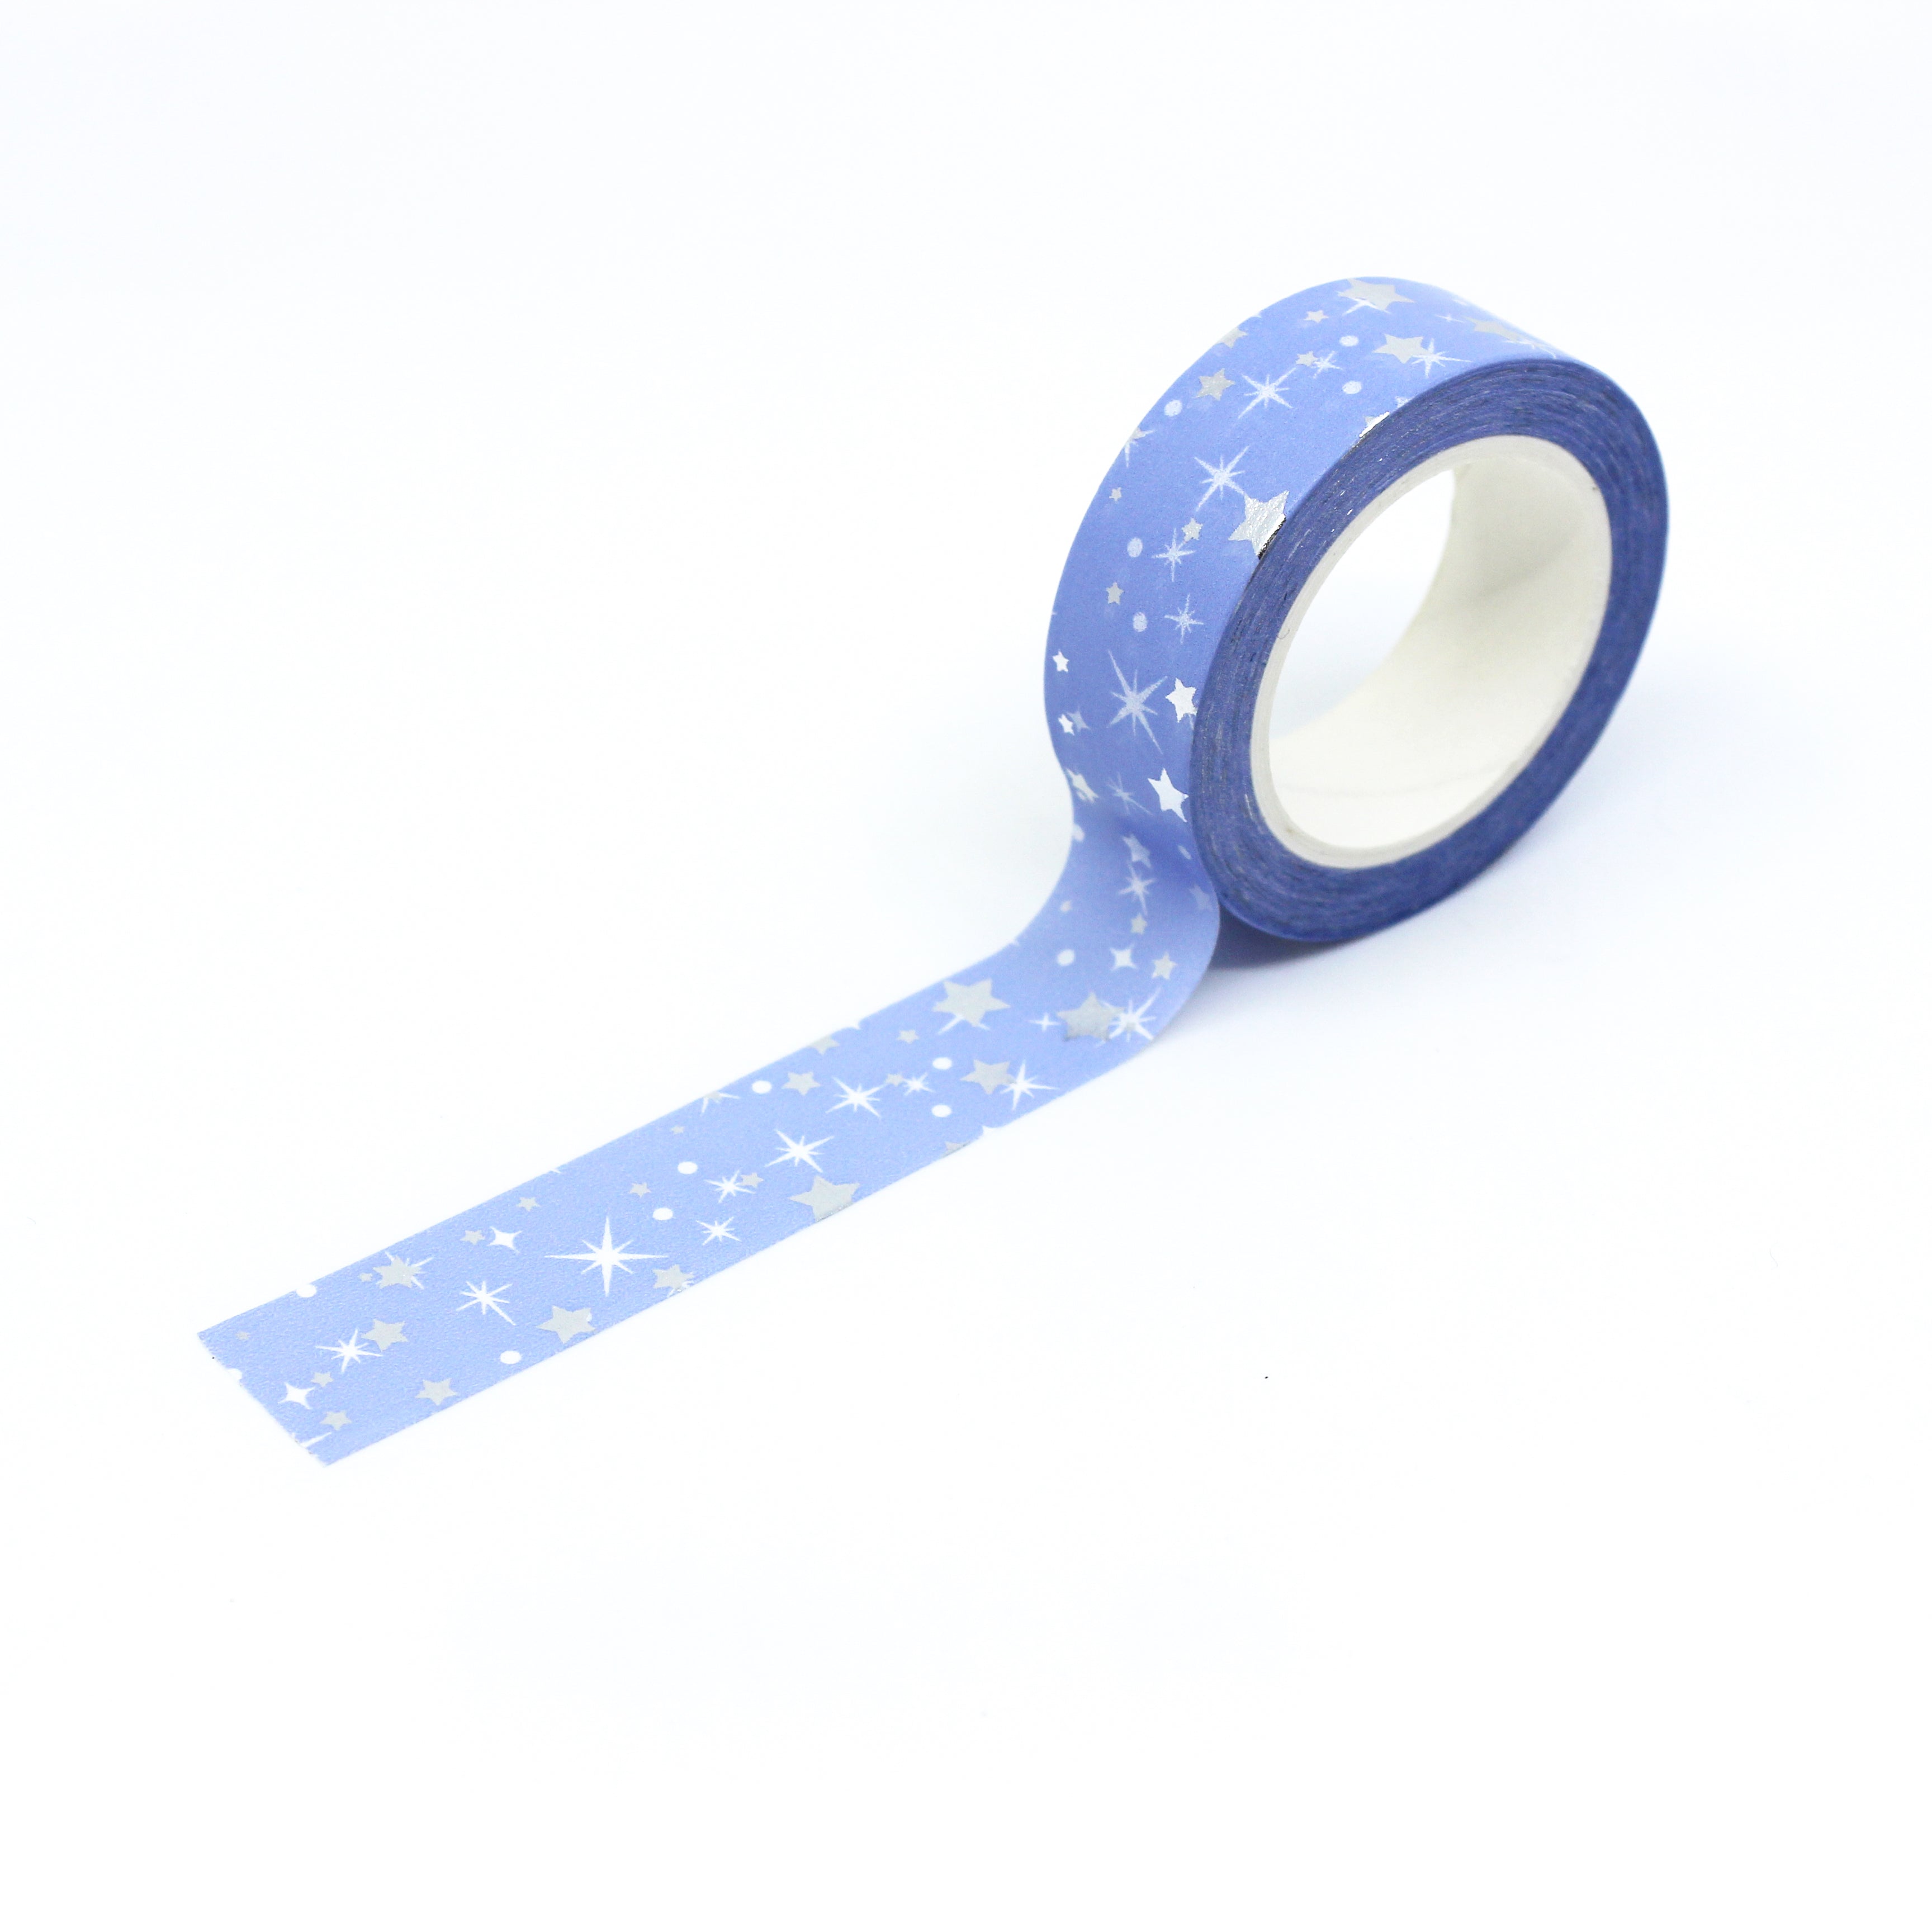 Elevate your crafts with our Blue Silver Foil Stars Washi Tape, featuring a celestial design with shimmering silver foil stars against a rich blue background. Ideal for adding a touch of cosmic elegance to your projects. This tape is sold at BBB Supplies Craft Shop.